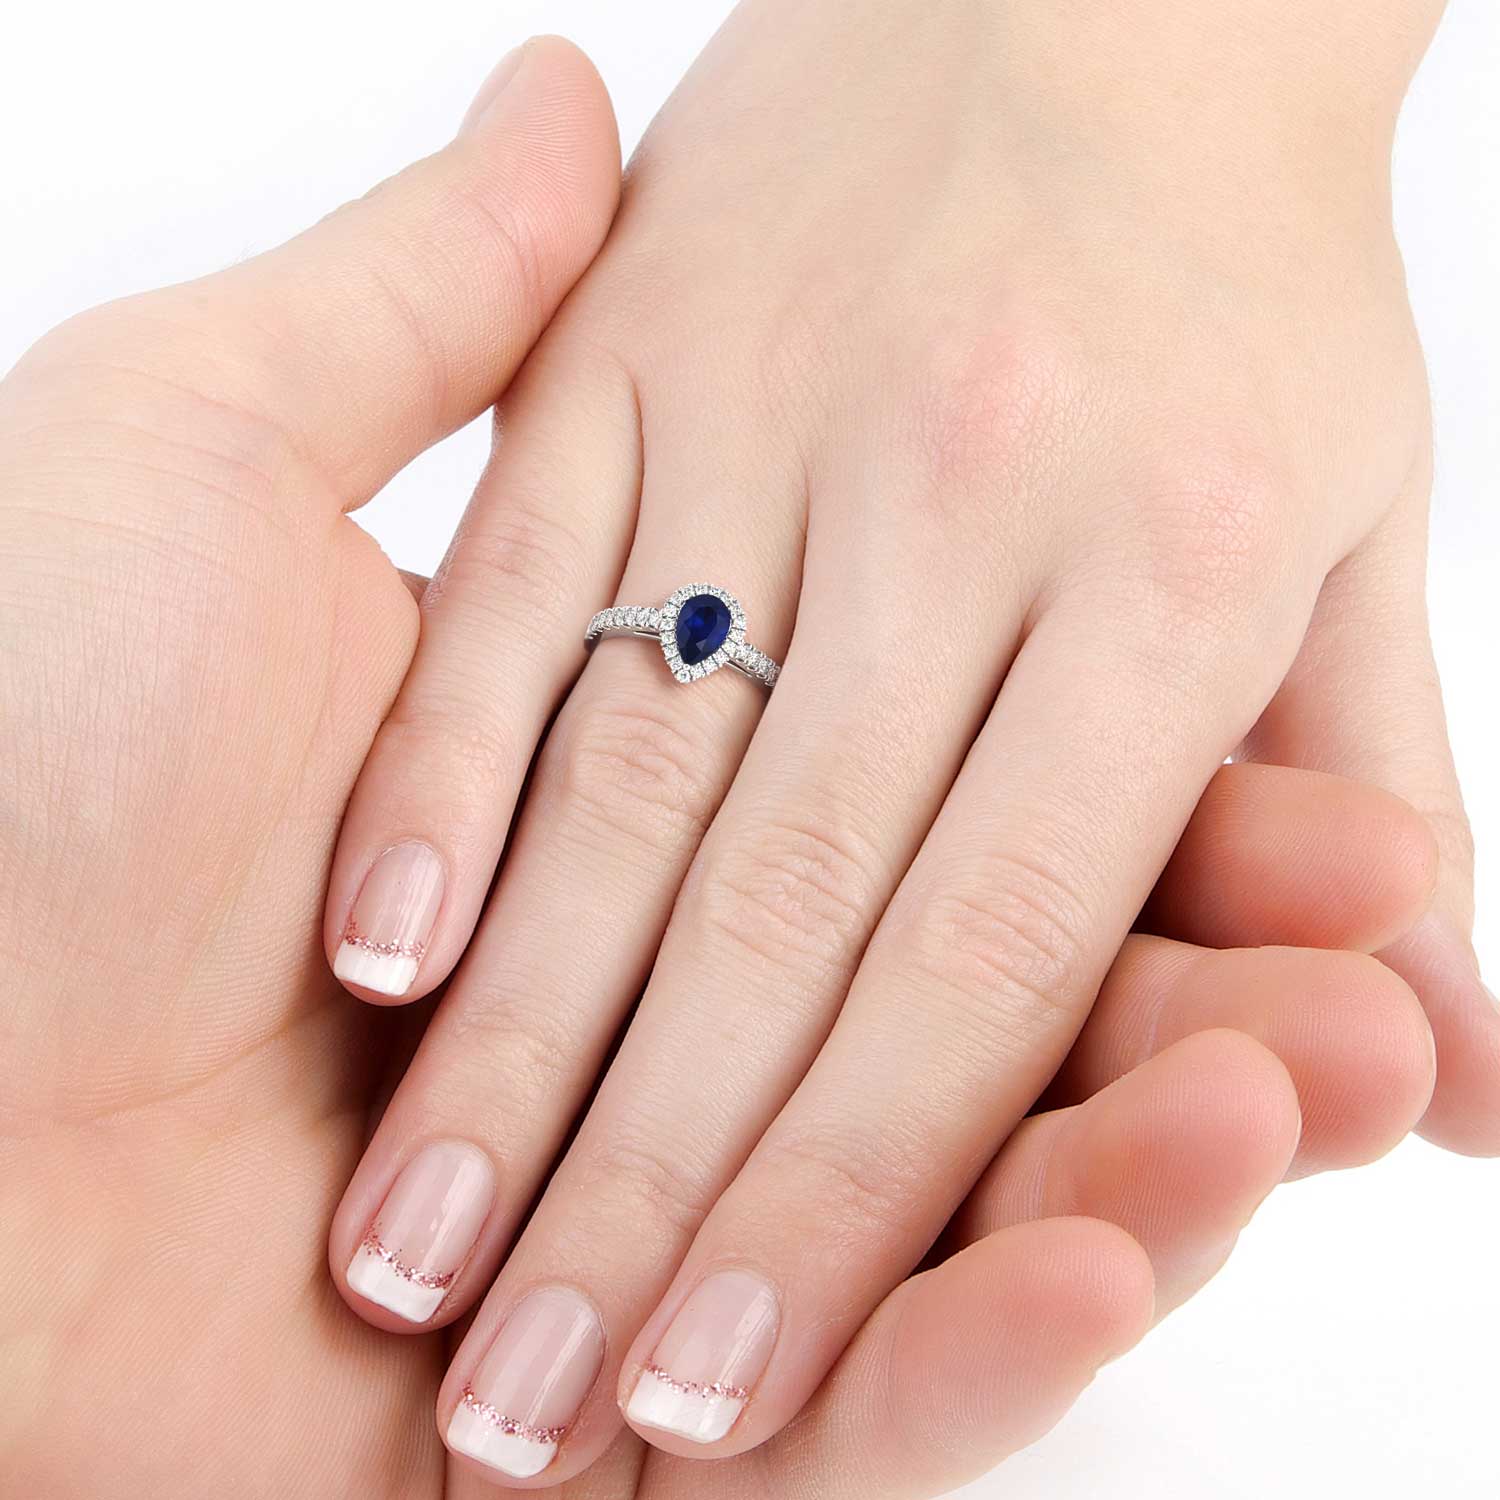 A mesmerizing sapphire pear-cut halo ring gracing a hand with its exquisite beauty and sophistication. The deep blue hue of the sapphire gemstone is enhanced by a halo of sparkling diamonds, evoking a sense of elegance and refinement.